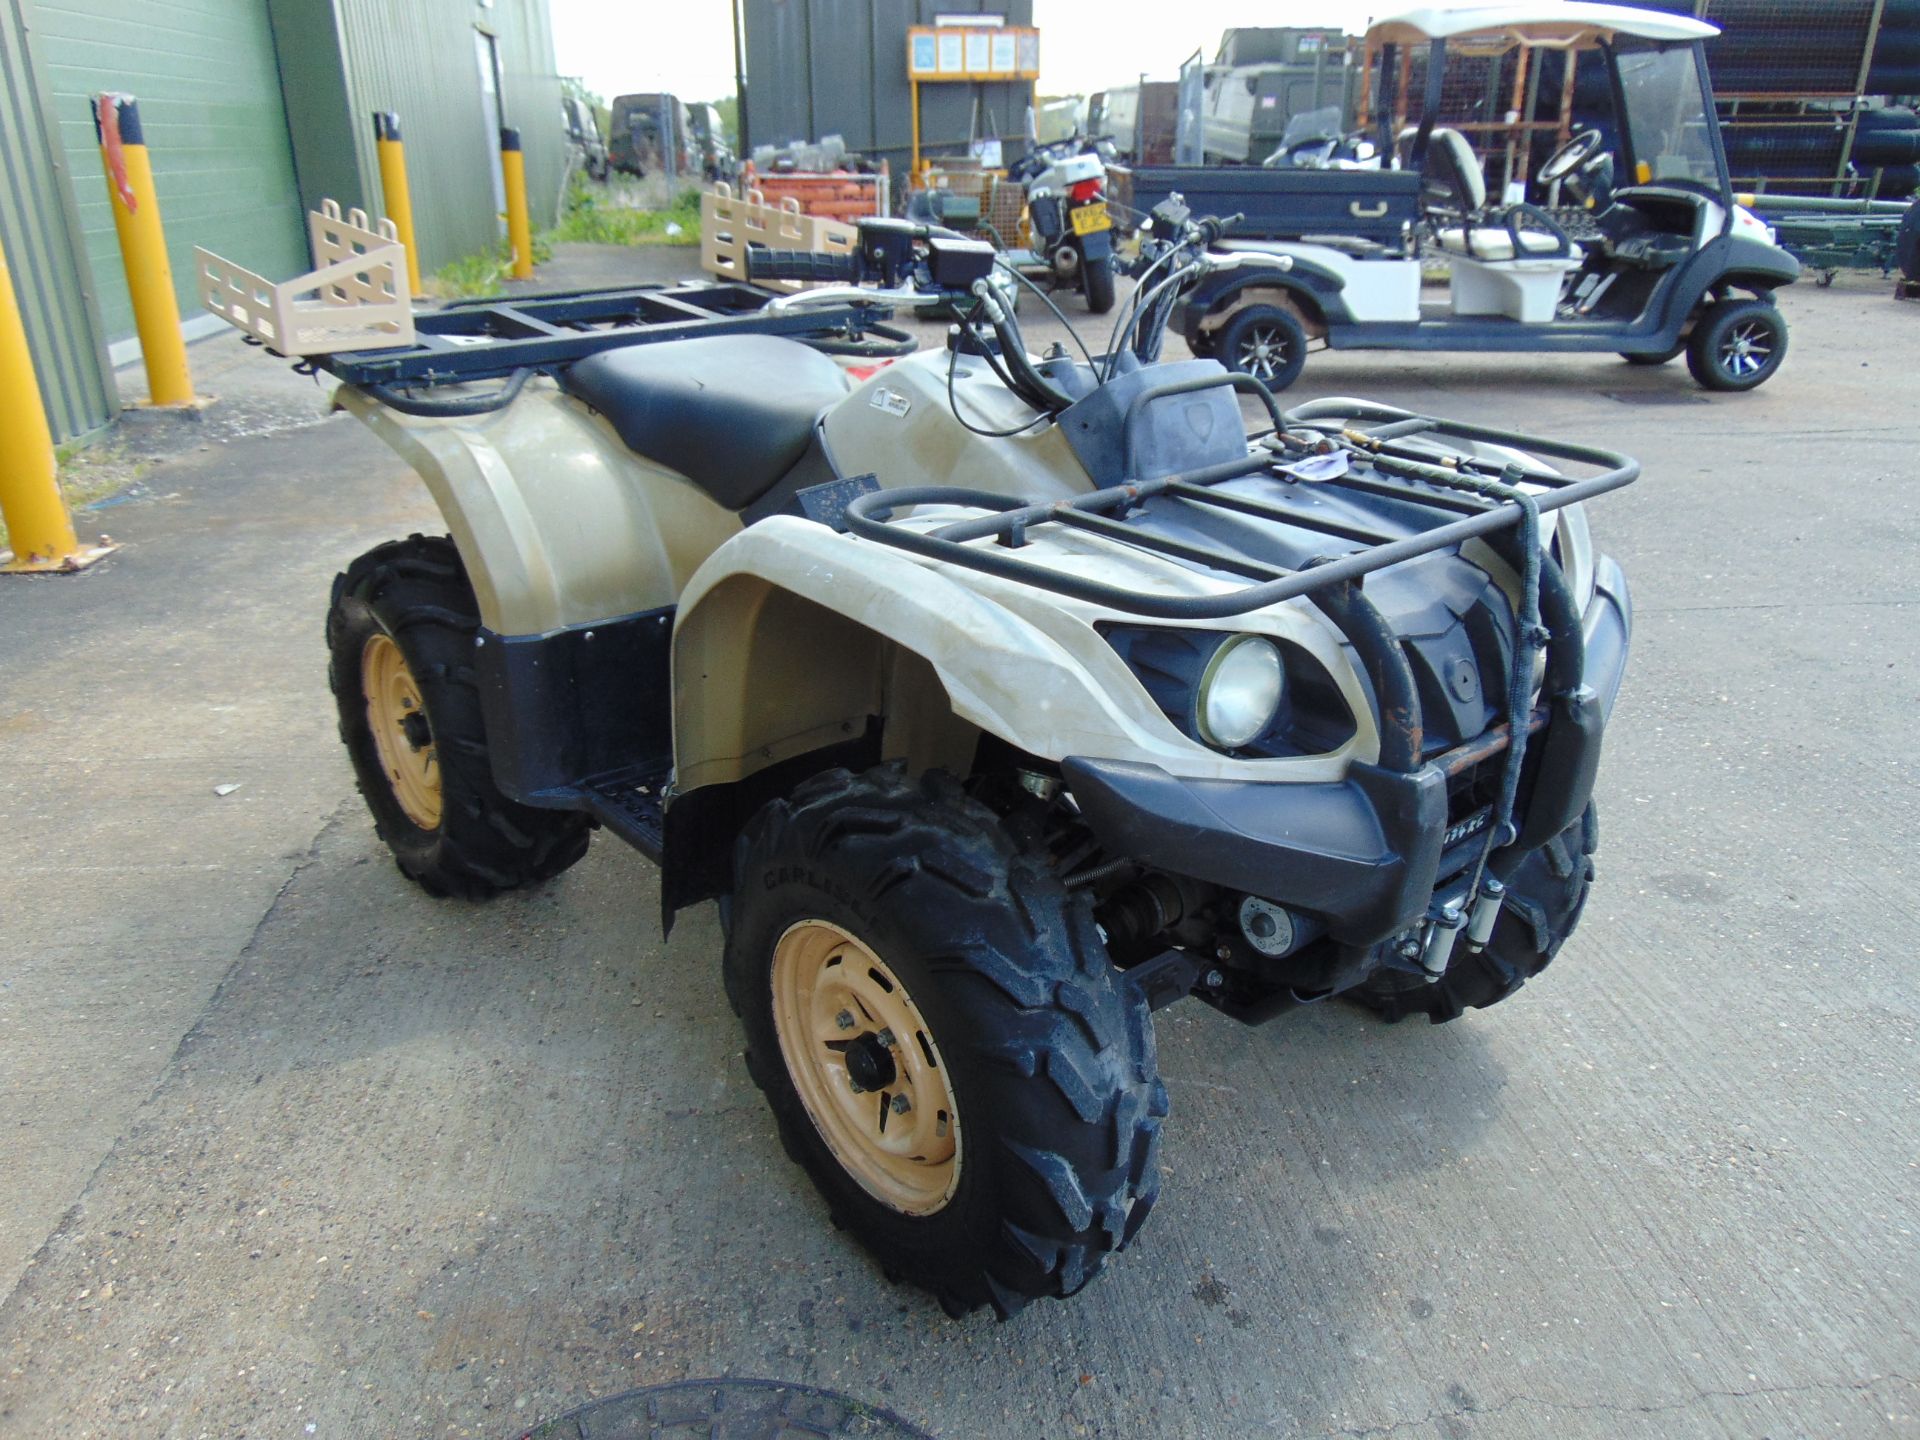 Military Specification Yamaha Grizzly 450 4 x 4 ATV Quad Bike Showing 223 hrs - Image 4 of 23